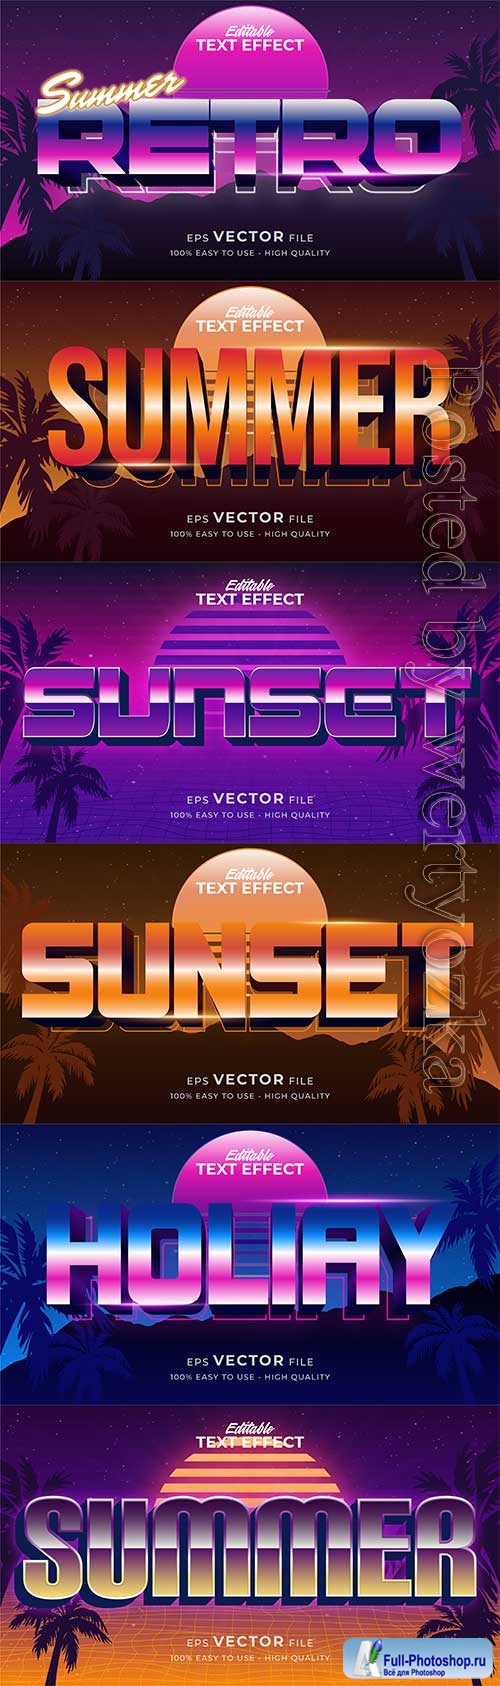 Retro summer holiday text in grunge style theme in vector vol 16